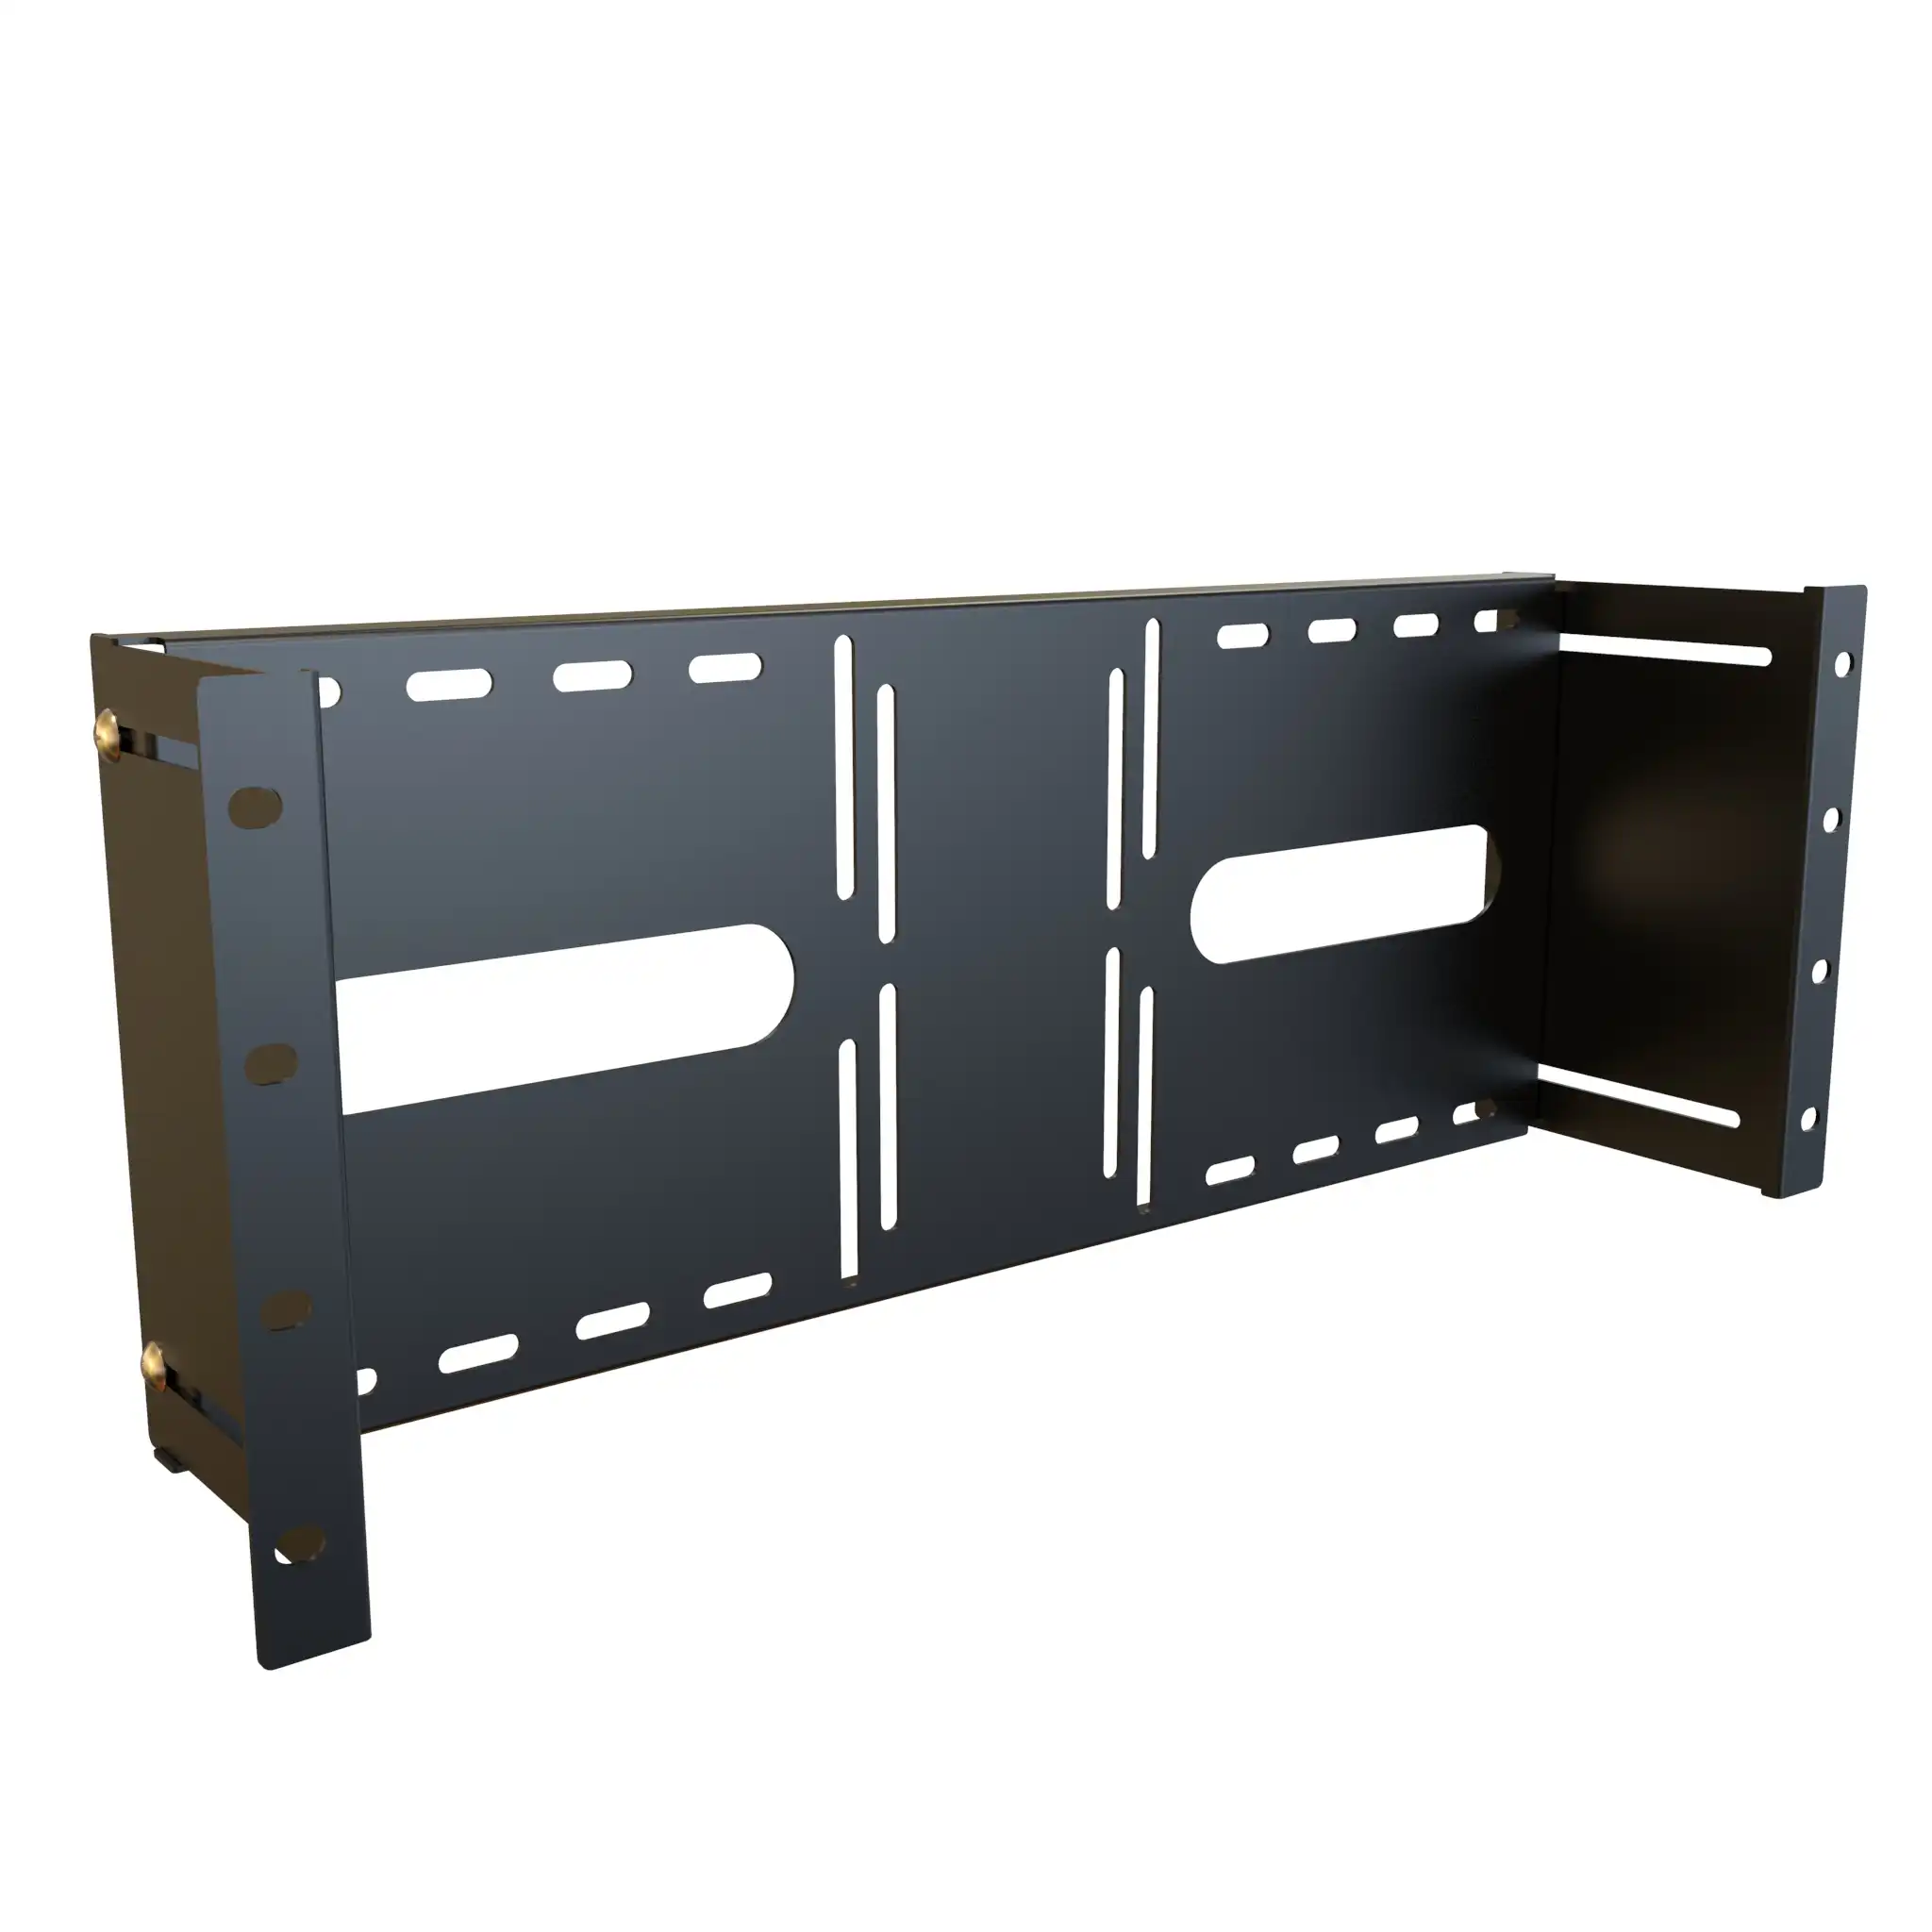 RB-MMB Series - Hammond Manufacturing Rack Solutions at KGA Enclosures Ltd - Click for a larger image